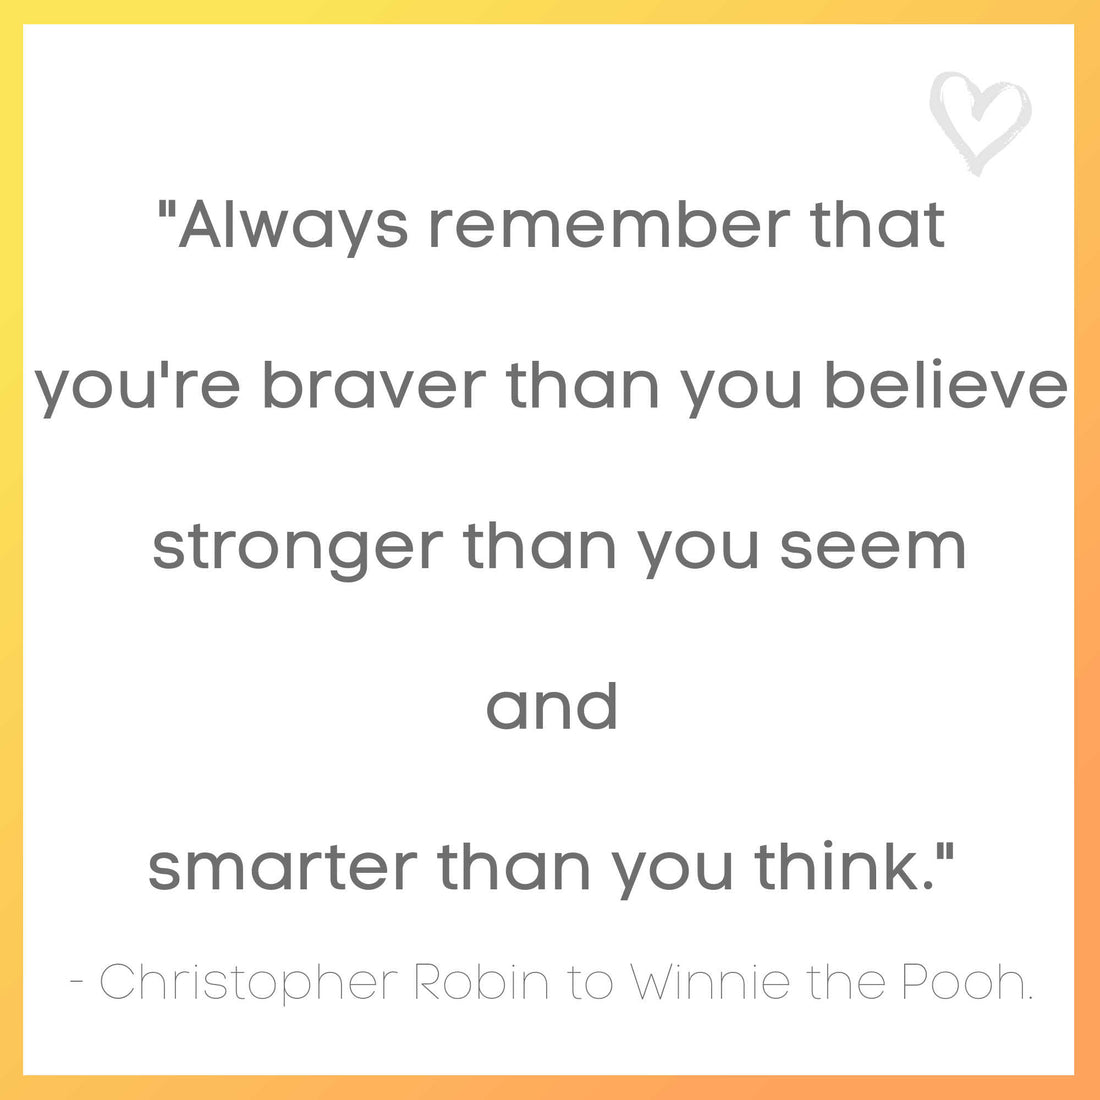 It's Winnie the Pooh Day - January